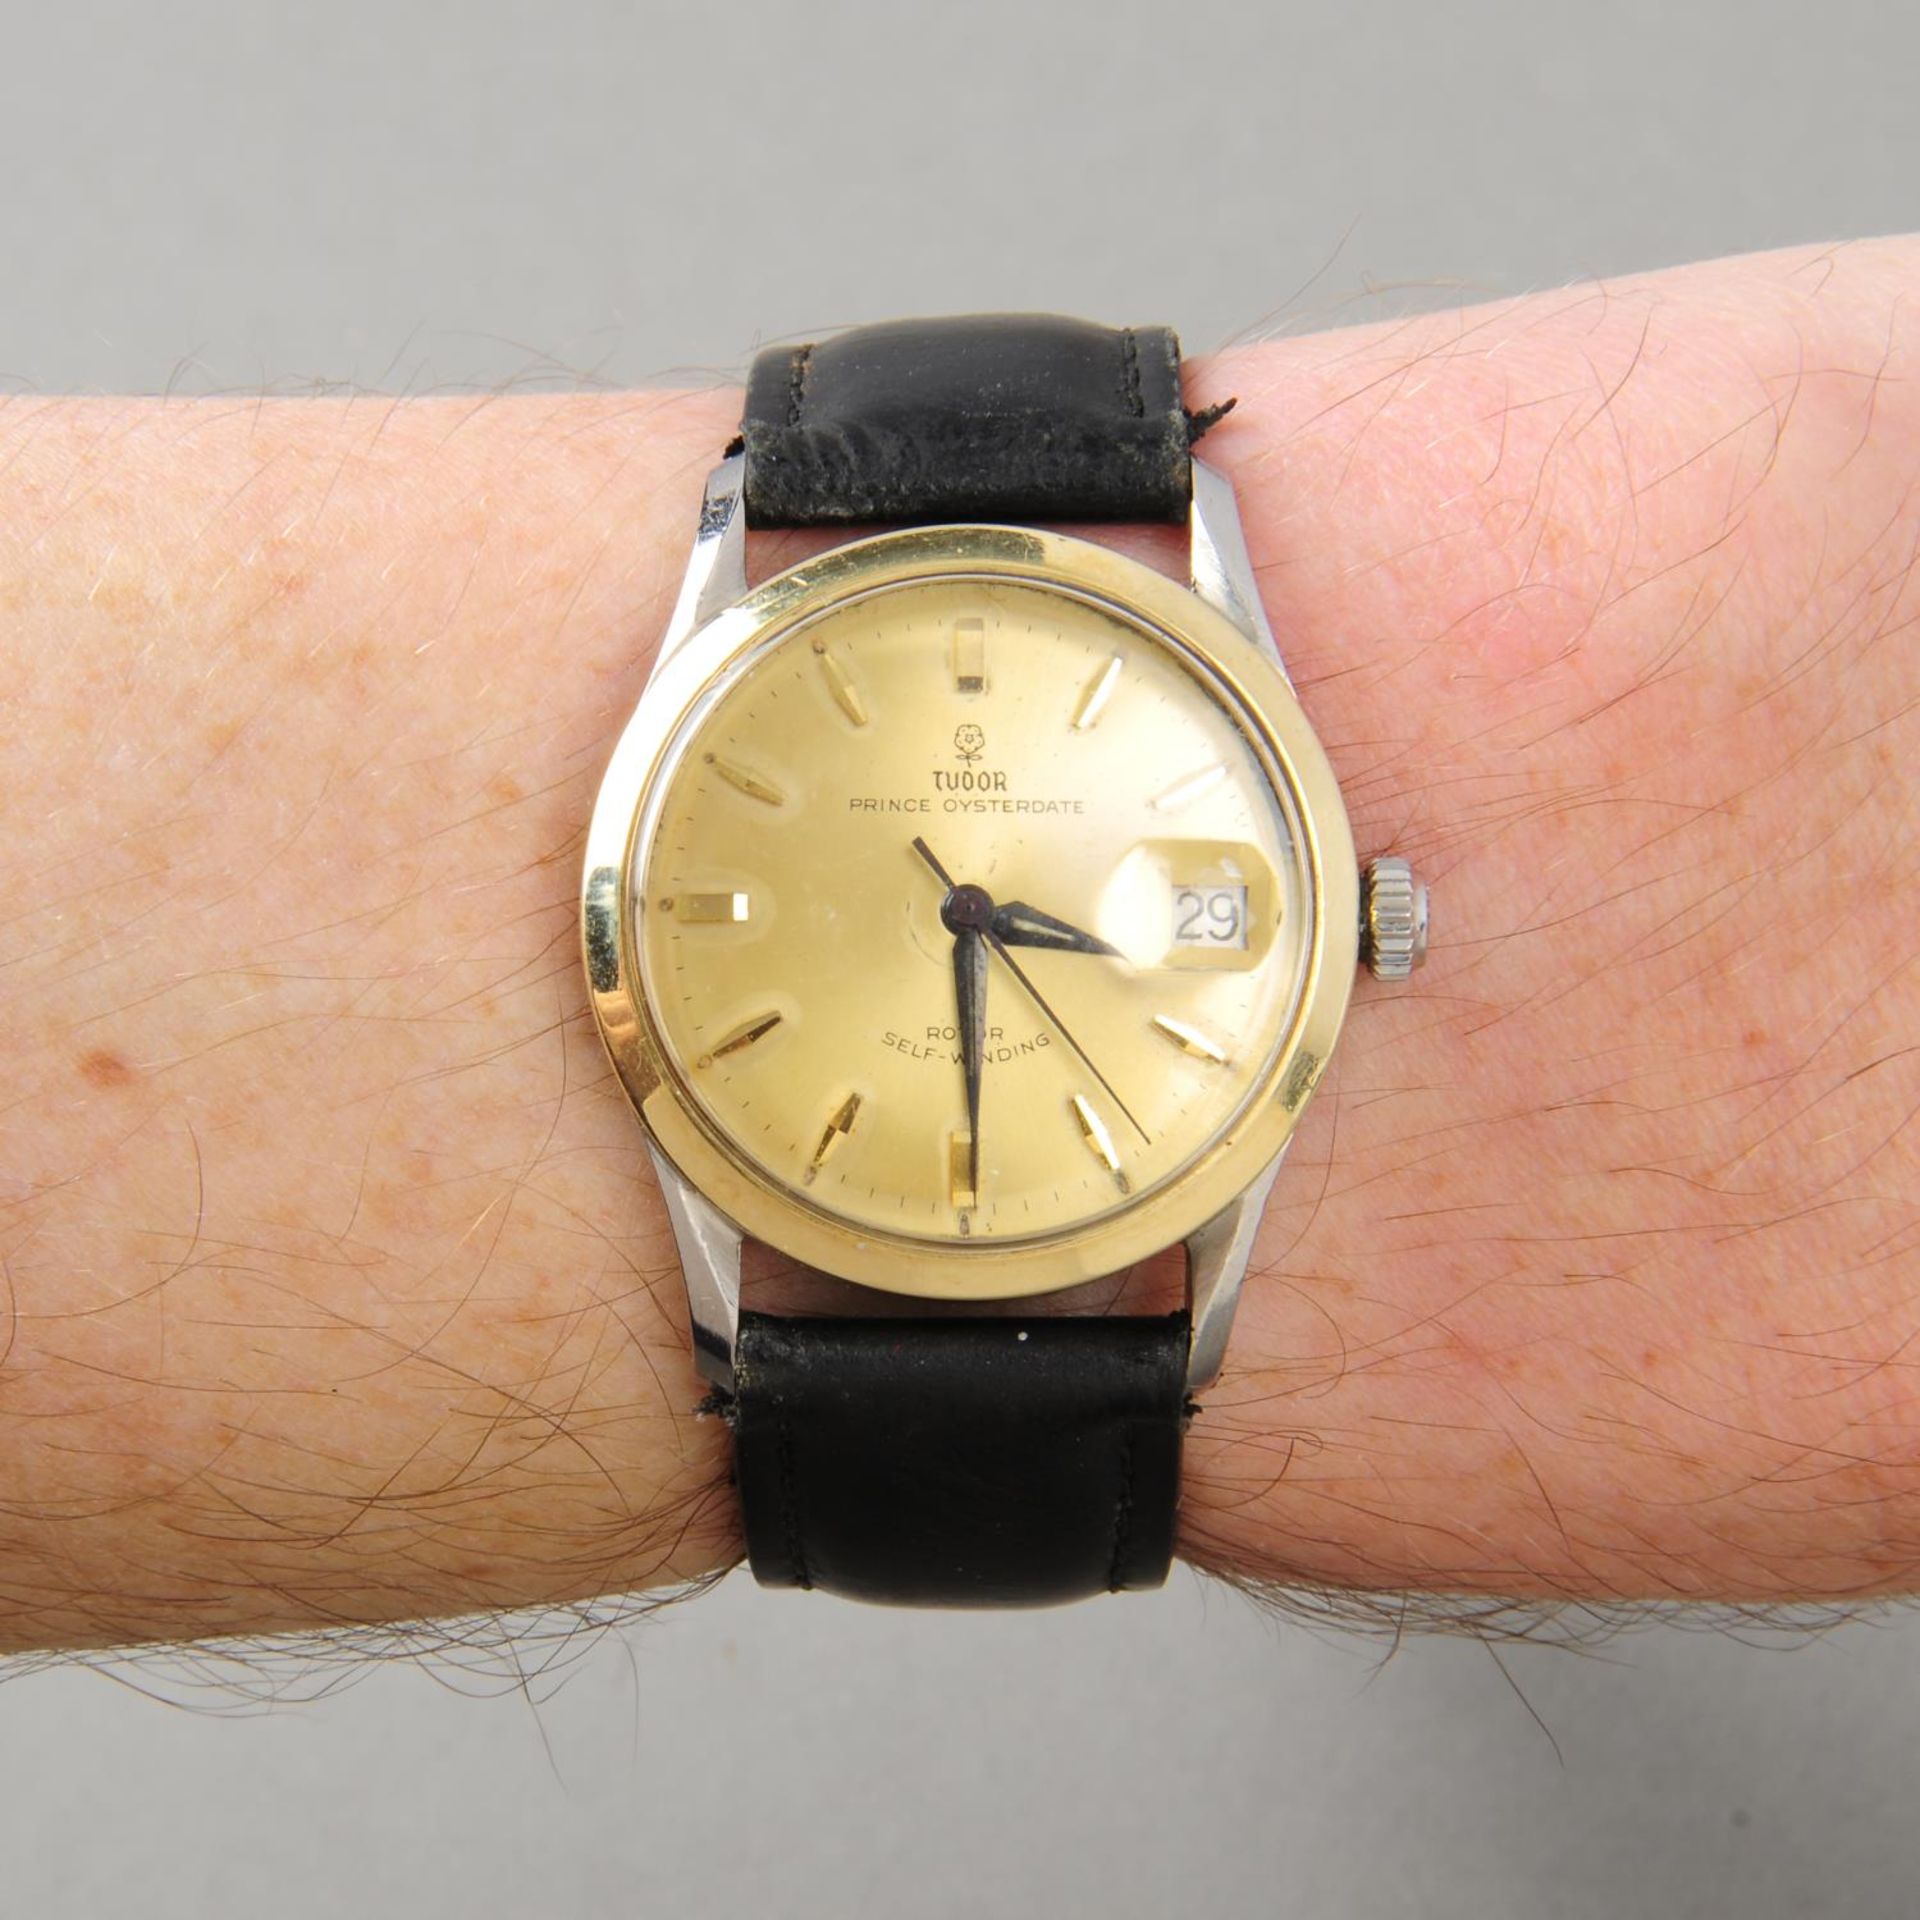 TUDOR - a gentleman's Prince Oysterdate wrist watch. Stainless steel case with yellow metal bezel. - Image 3 of 5